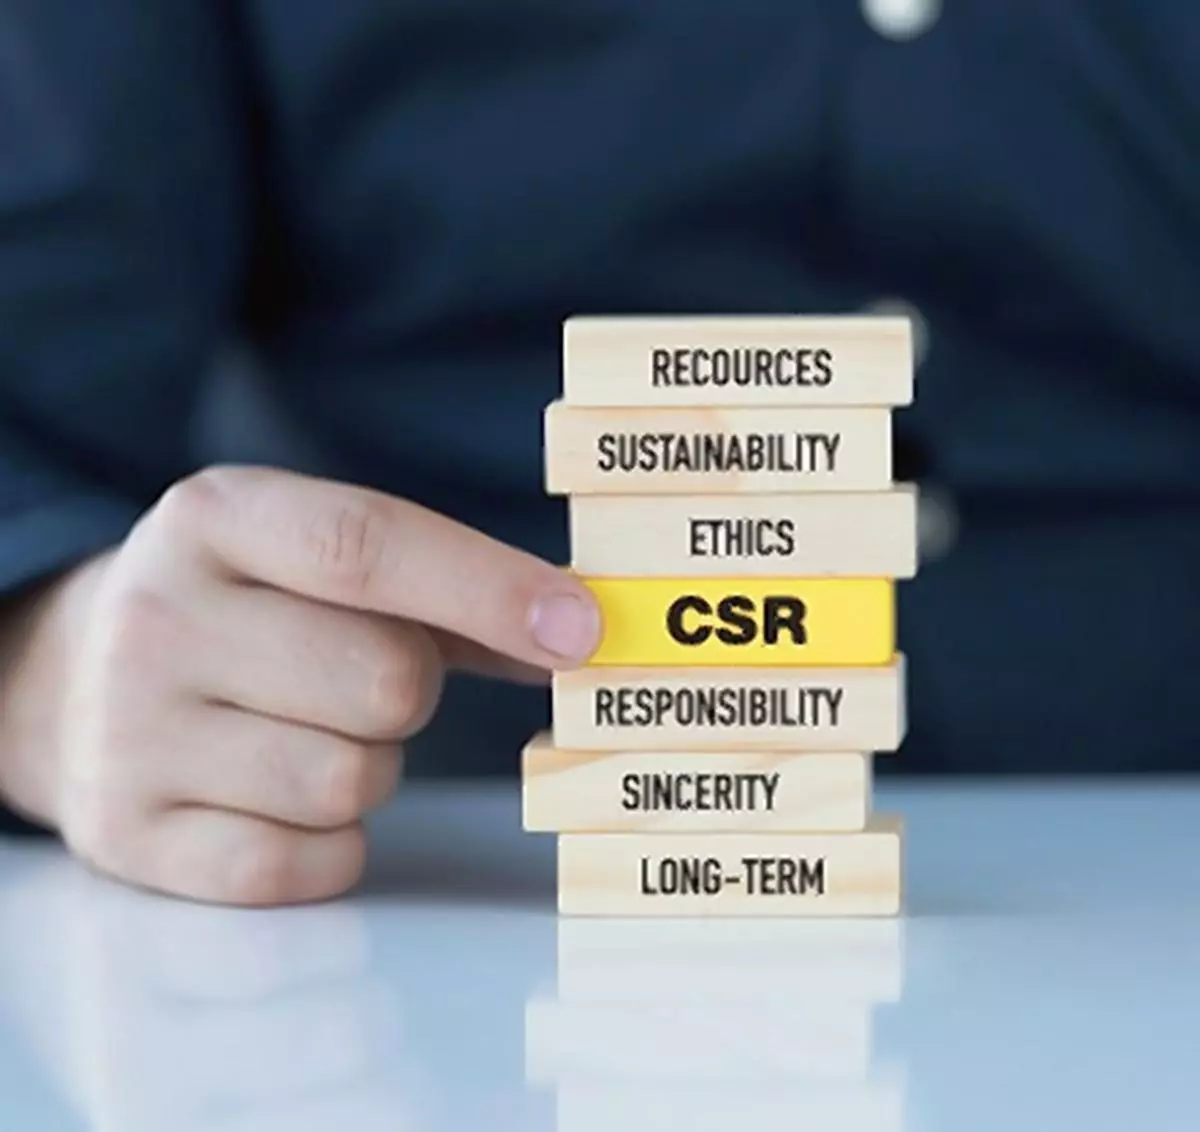 As per the Companies Act 2013, it is mandatory for certain specified companies to spend 2 per cent of their average profits to CSR